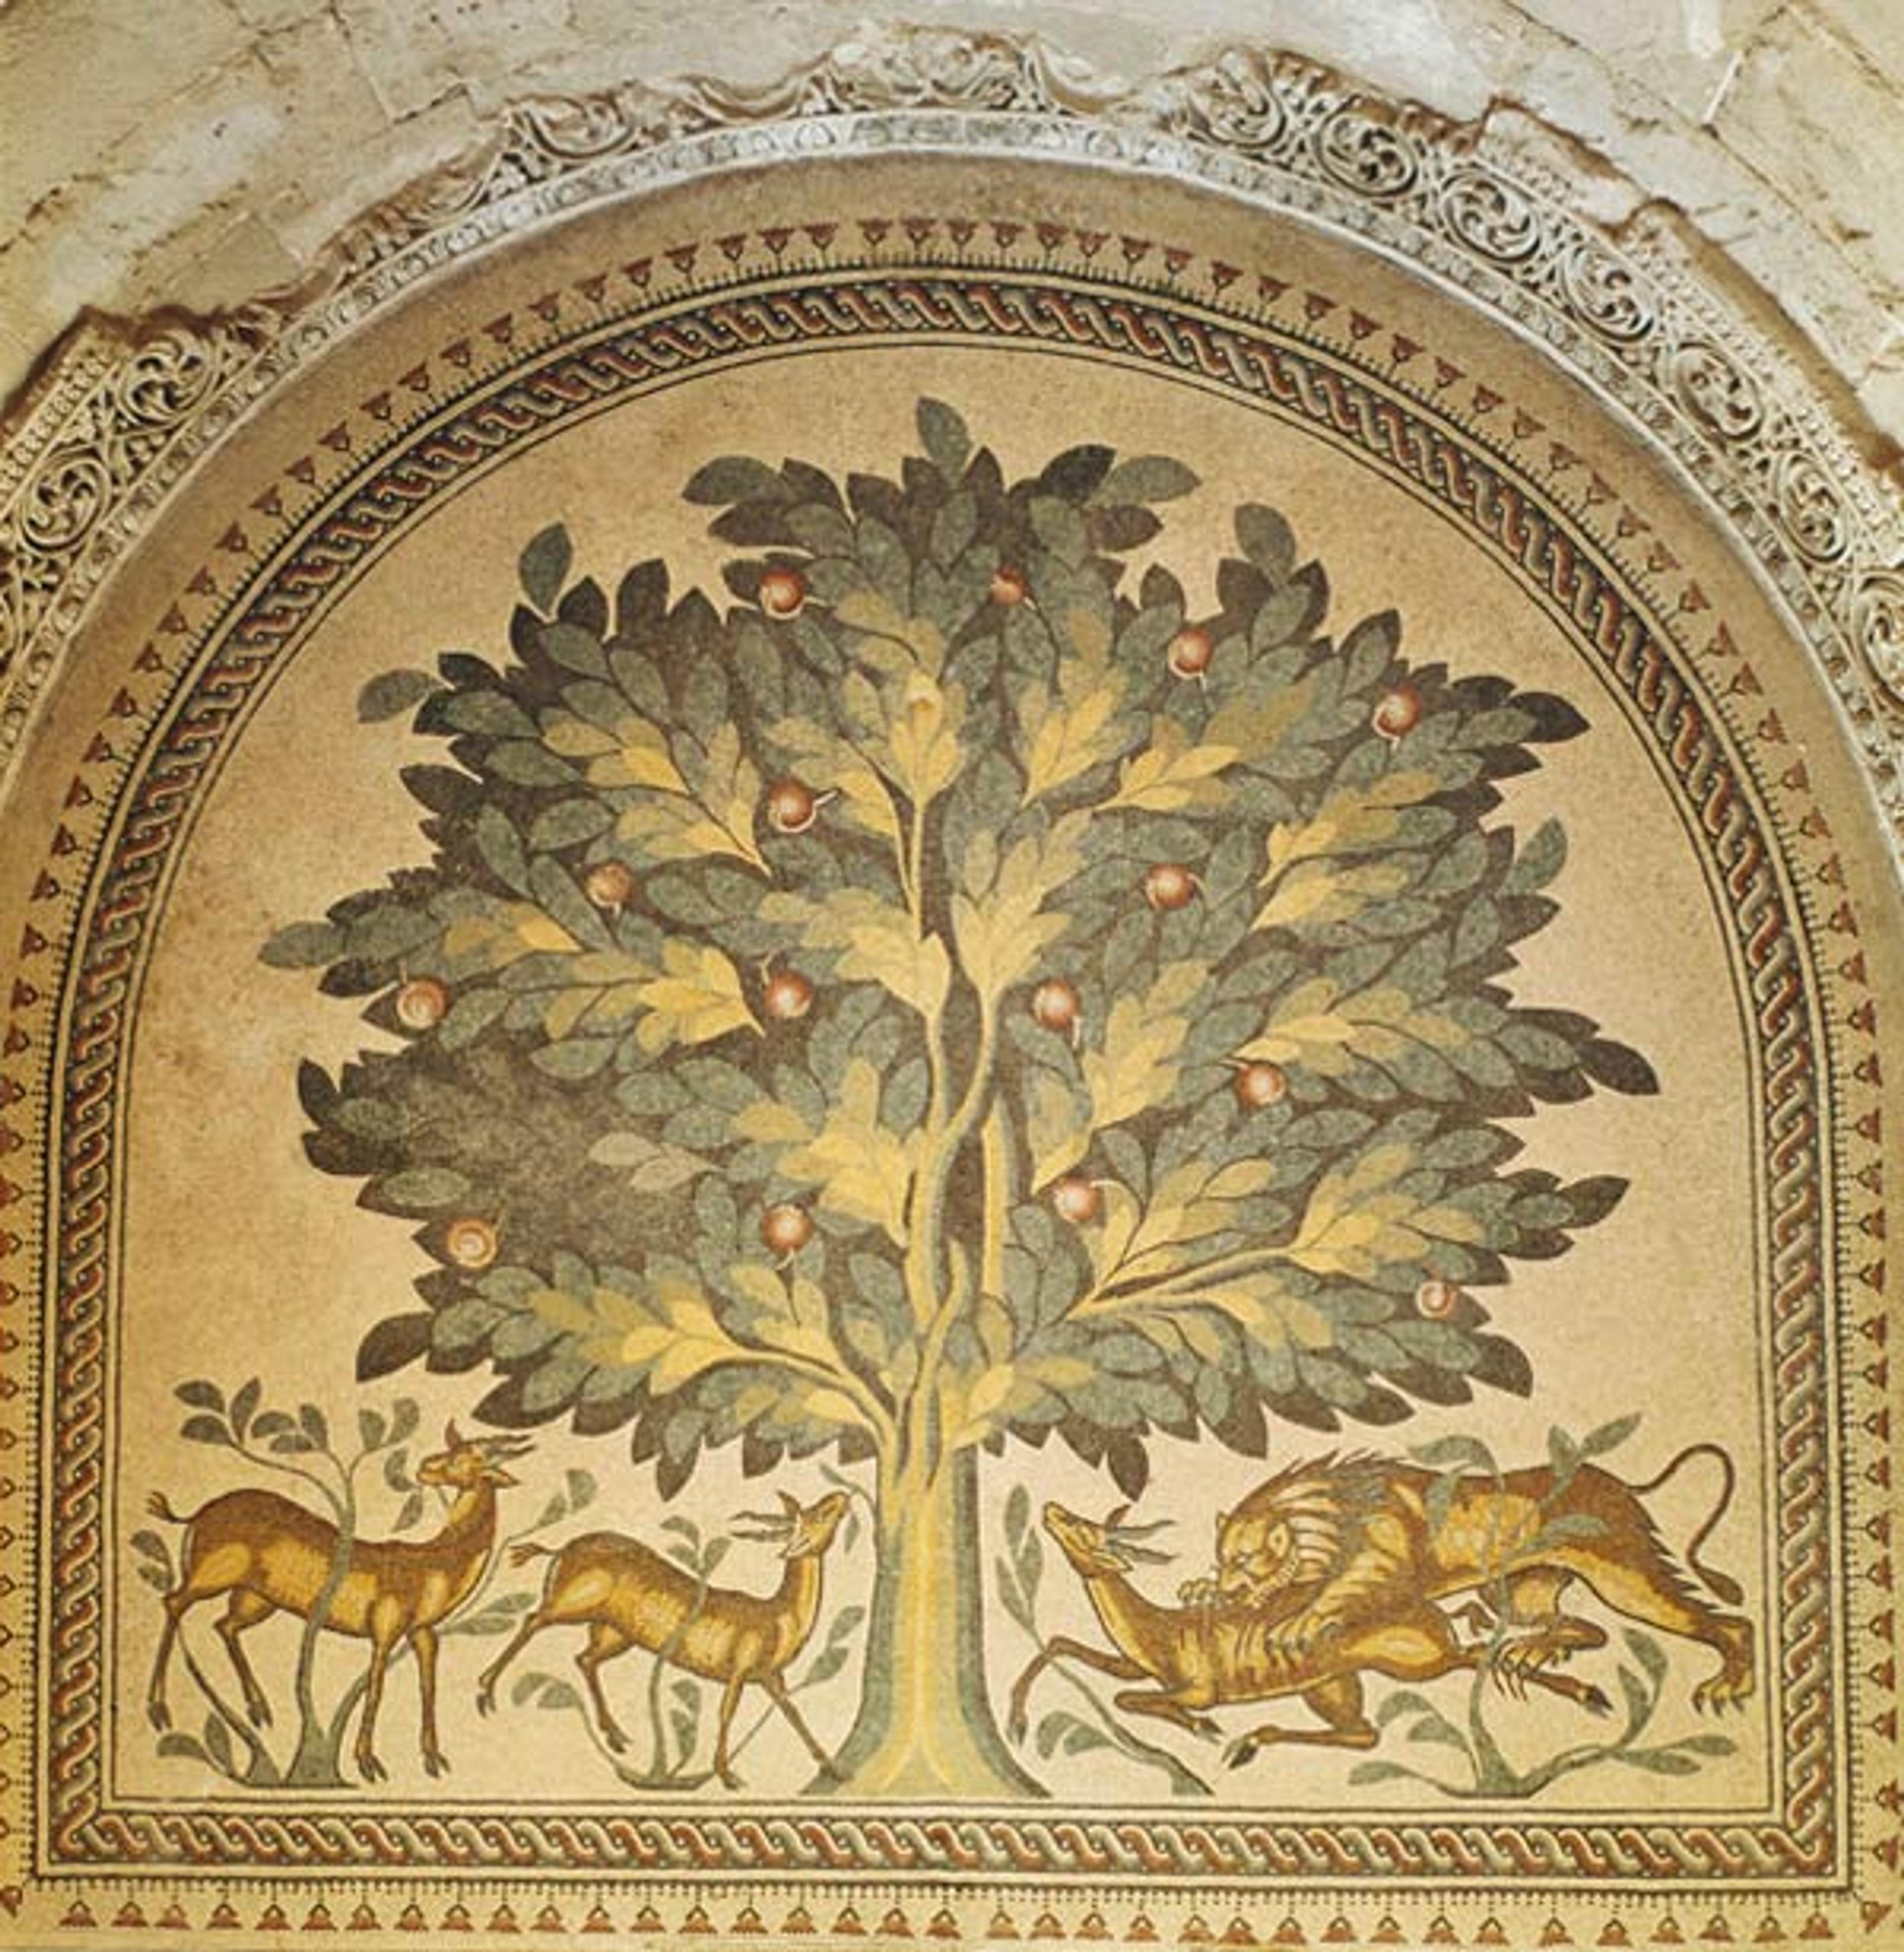 Mosaic pavement with a lion and gazelle